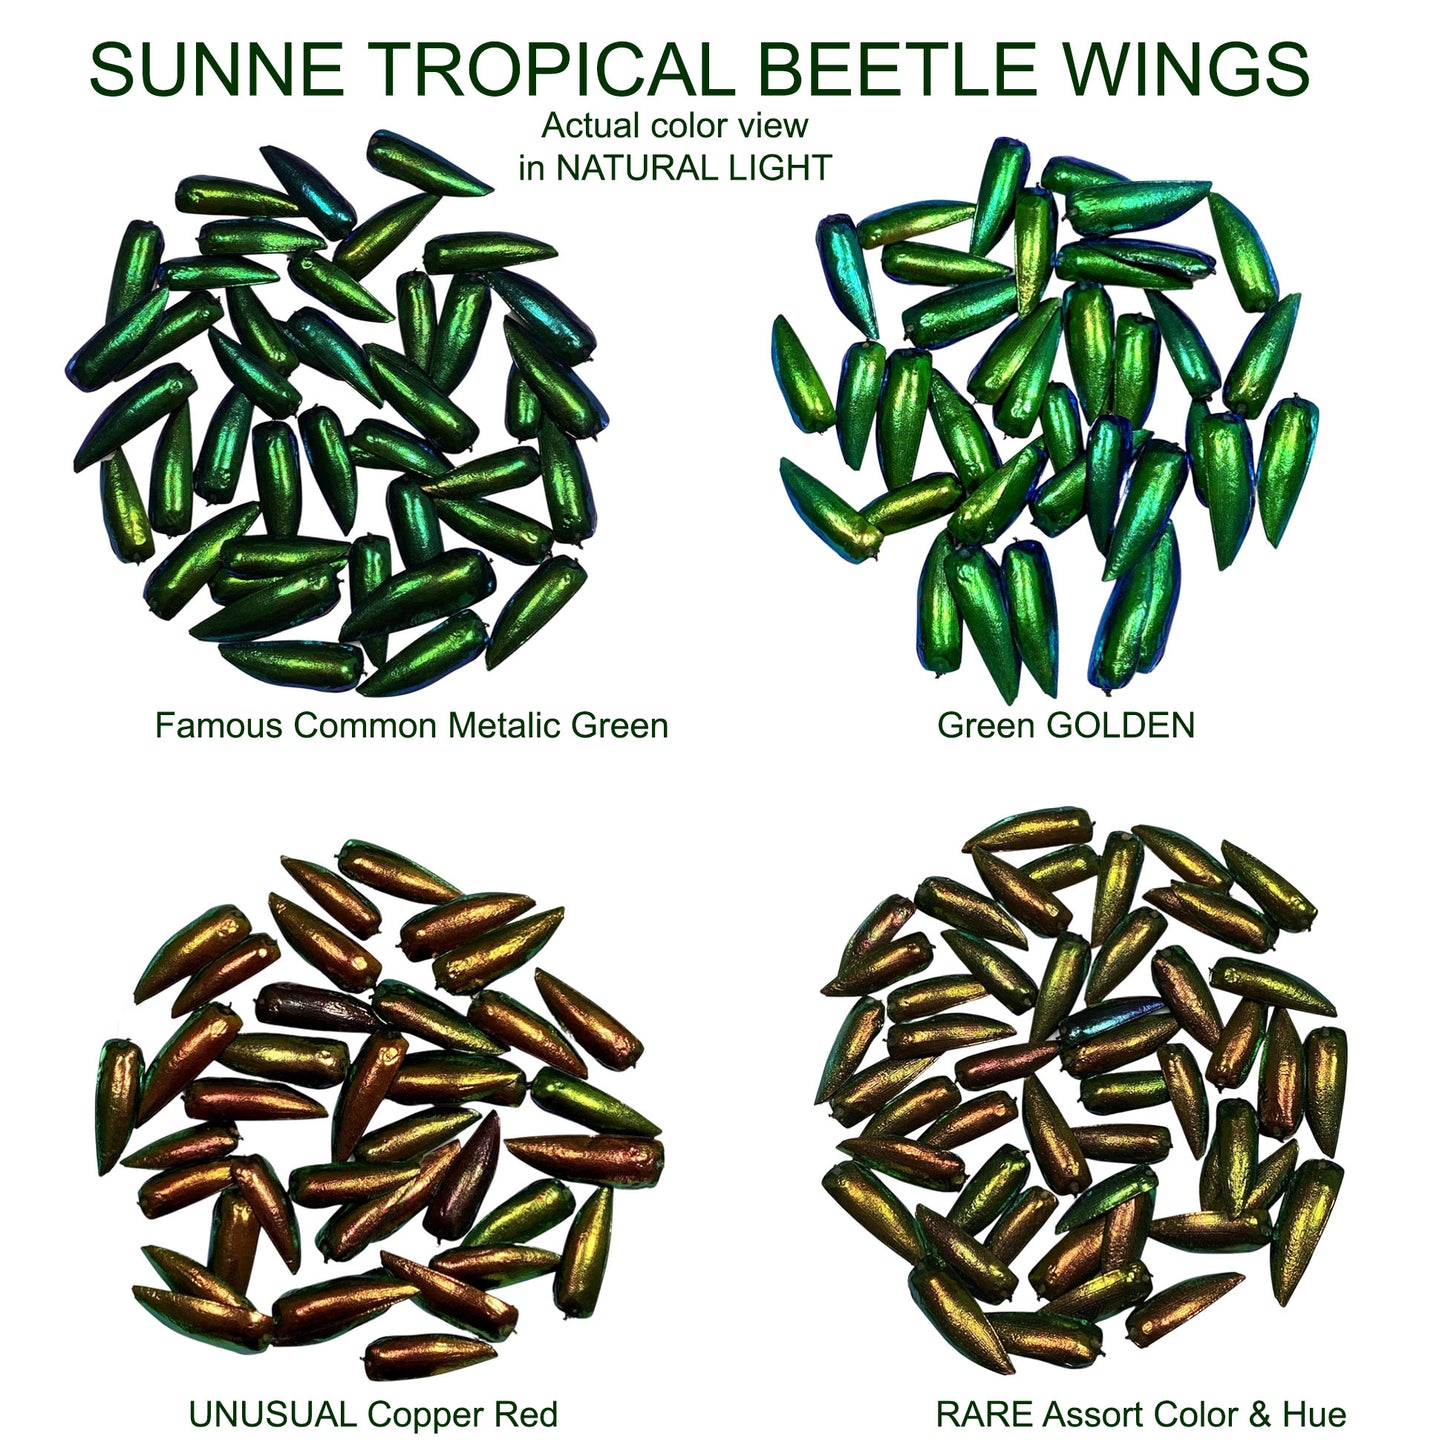 Jewel Beetle Wings UNDRILLED NO-HOLE 100 Pcs Natural Wings - REDDISH Green